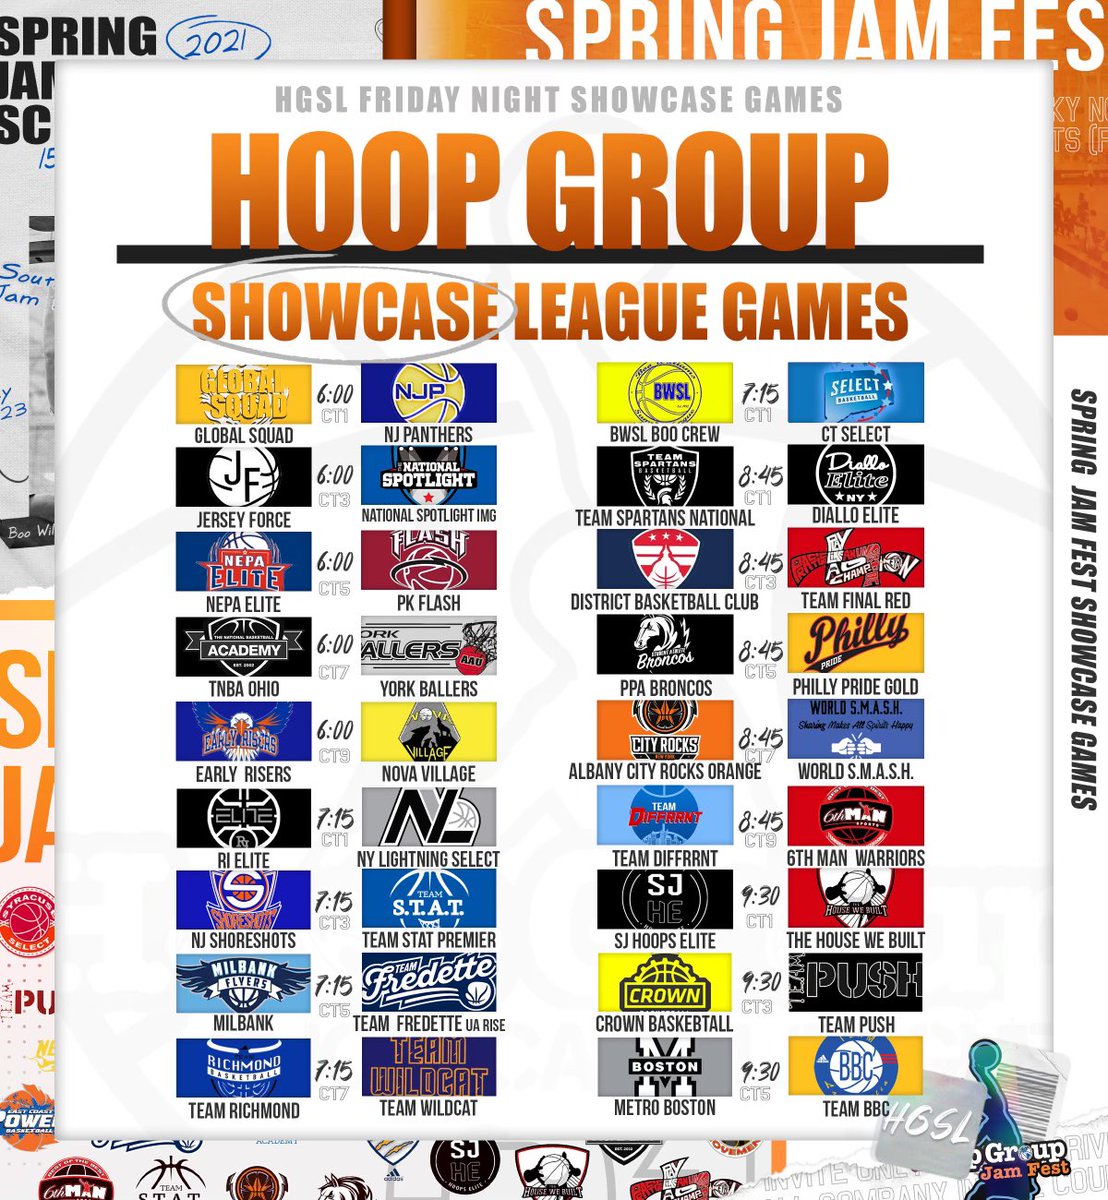 Less than 24 hours until we kick off Showcase Season for #HGSL at @TheHoopGroup Spring Jam Fest !! Tons of talent and loaded matchups here that will be sure to live up to the hype! We can’t wait!! 🏀🔥📈 Tune in to @BeTheBeastBTB for all the action and rosters! 📺👀😍